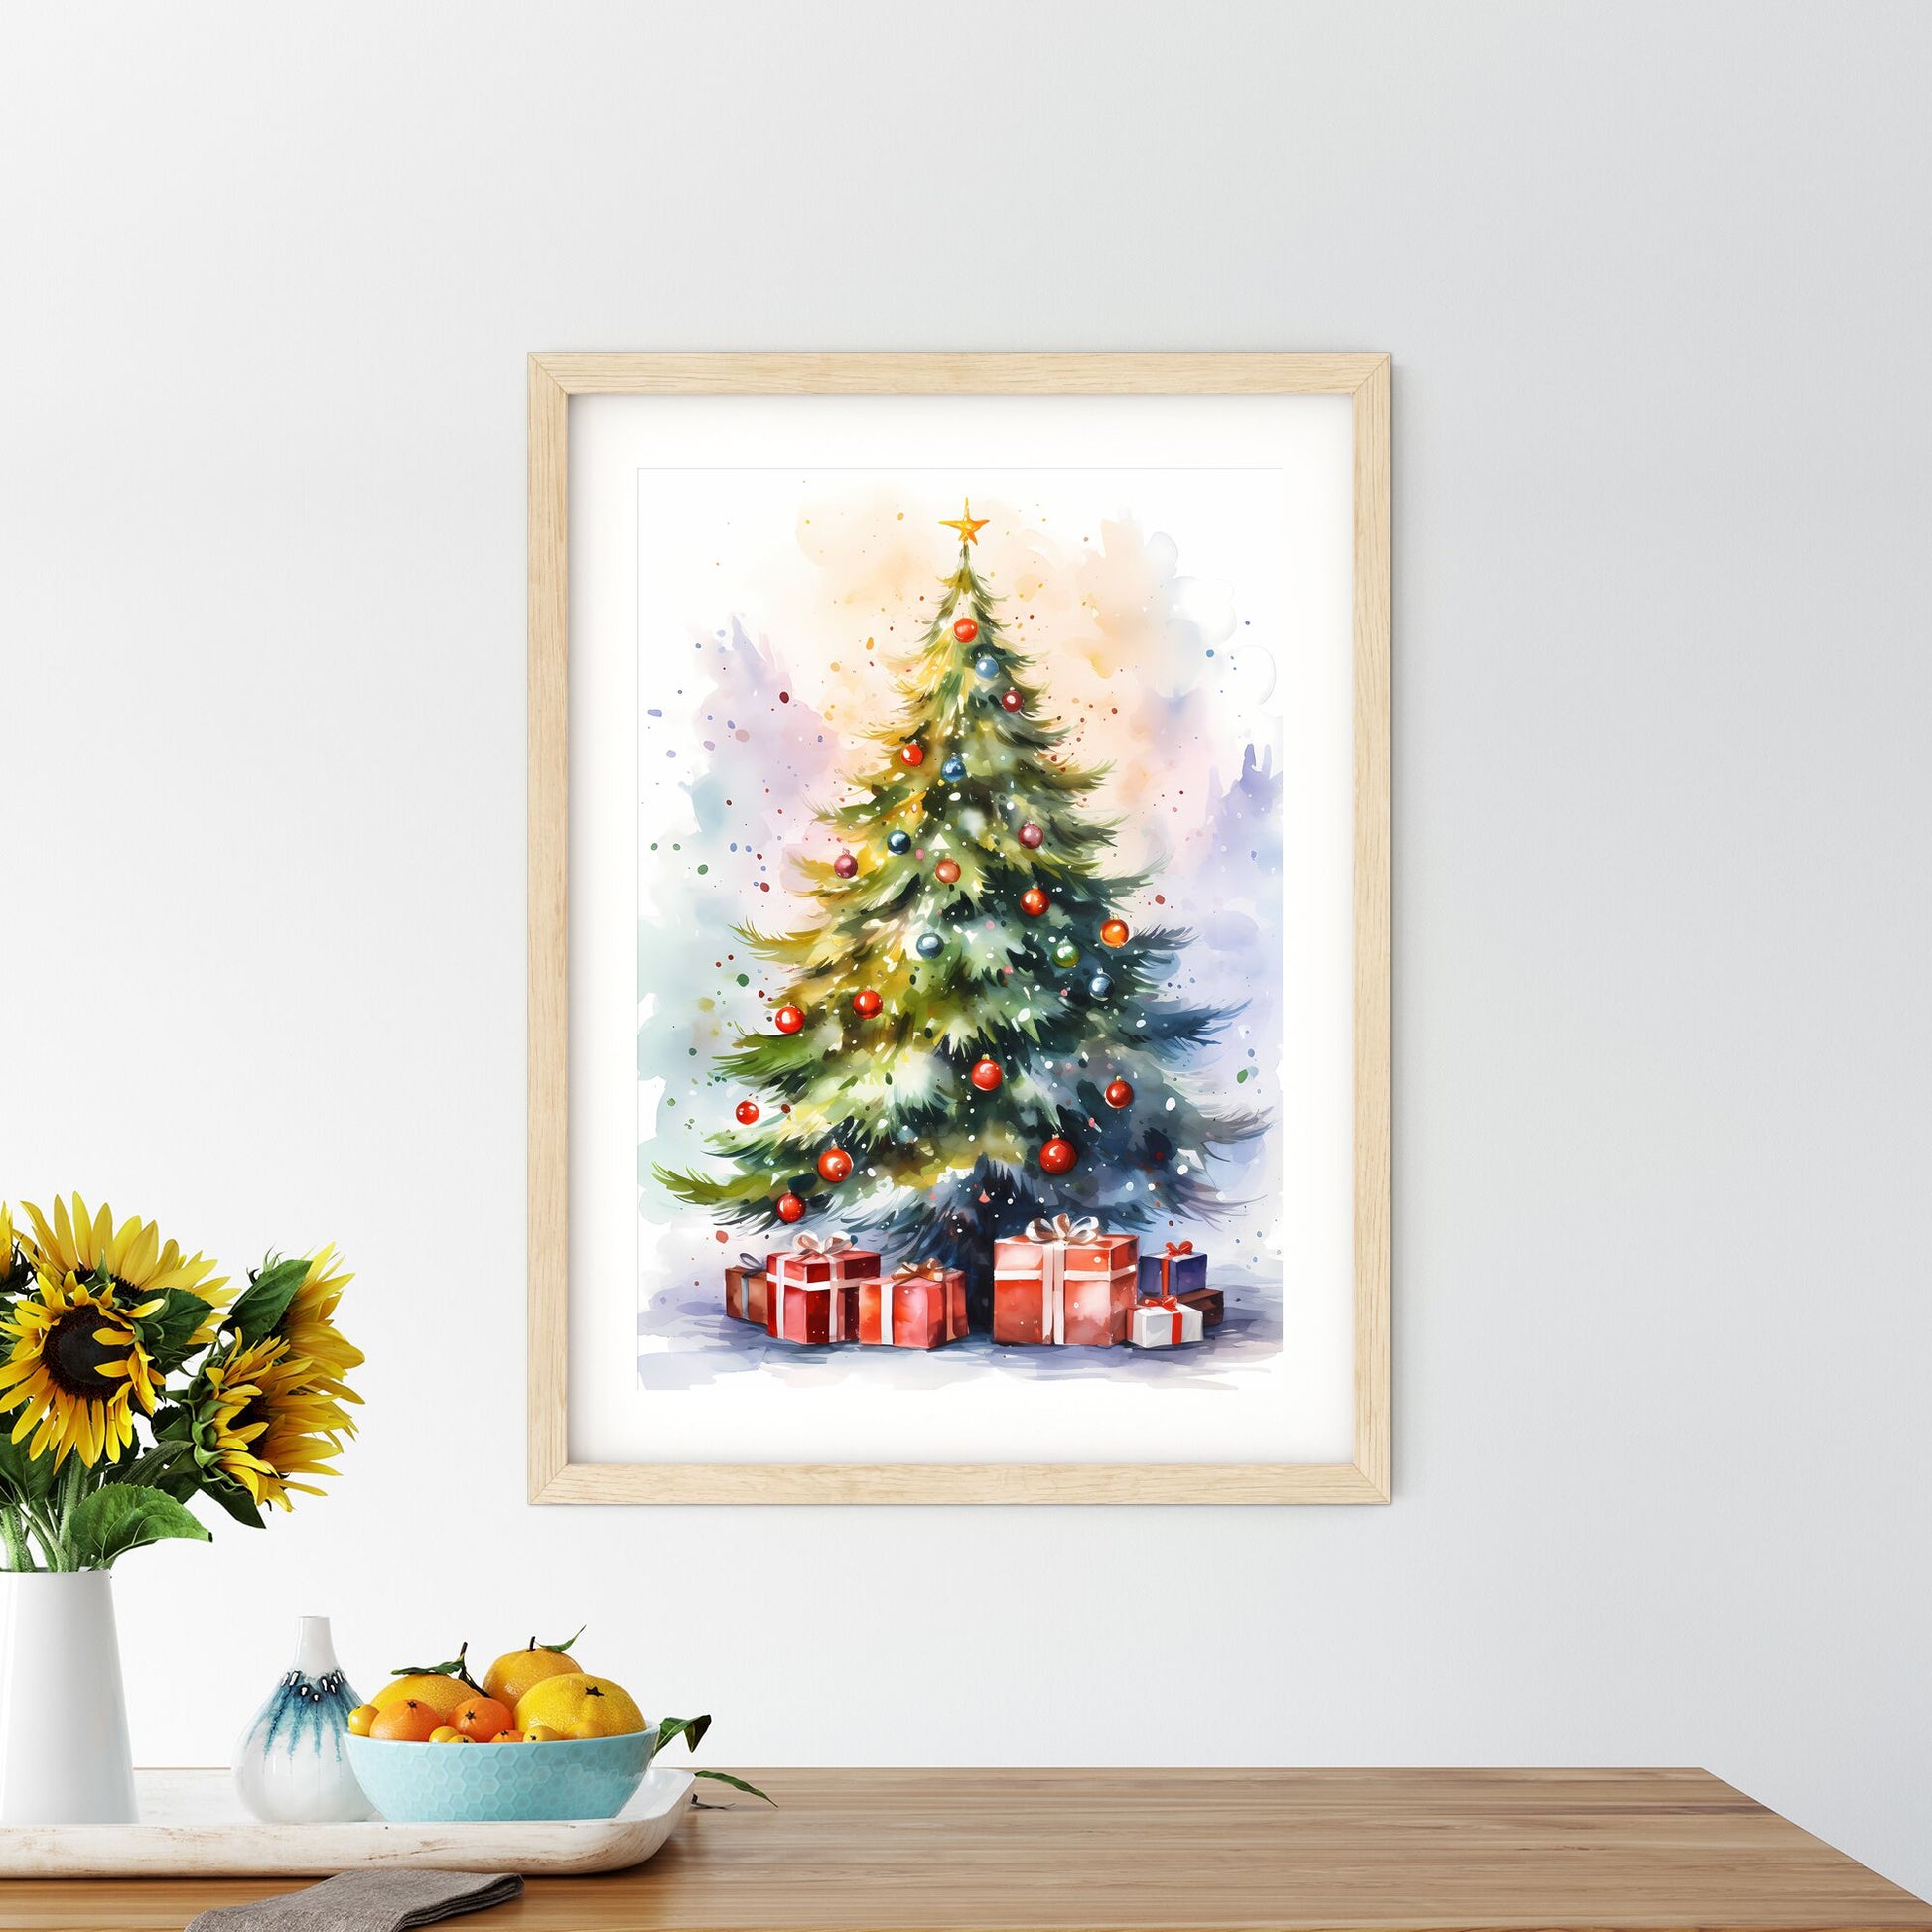 Holidays - A Watercolor Of A Christmas Tree With Presents Default Title